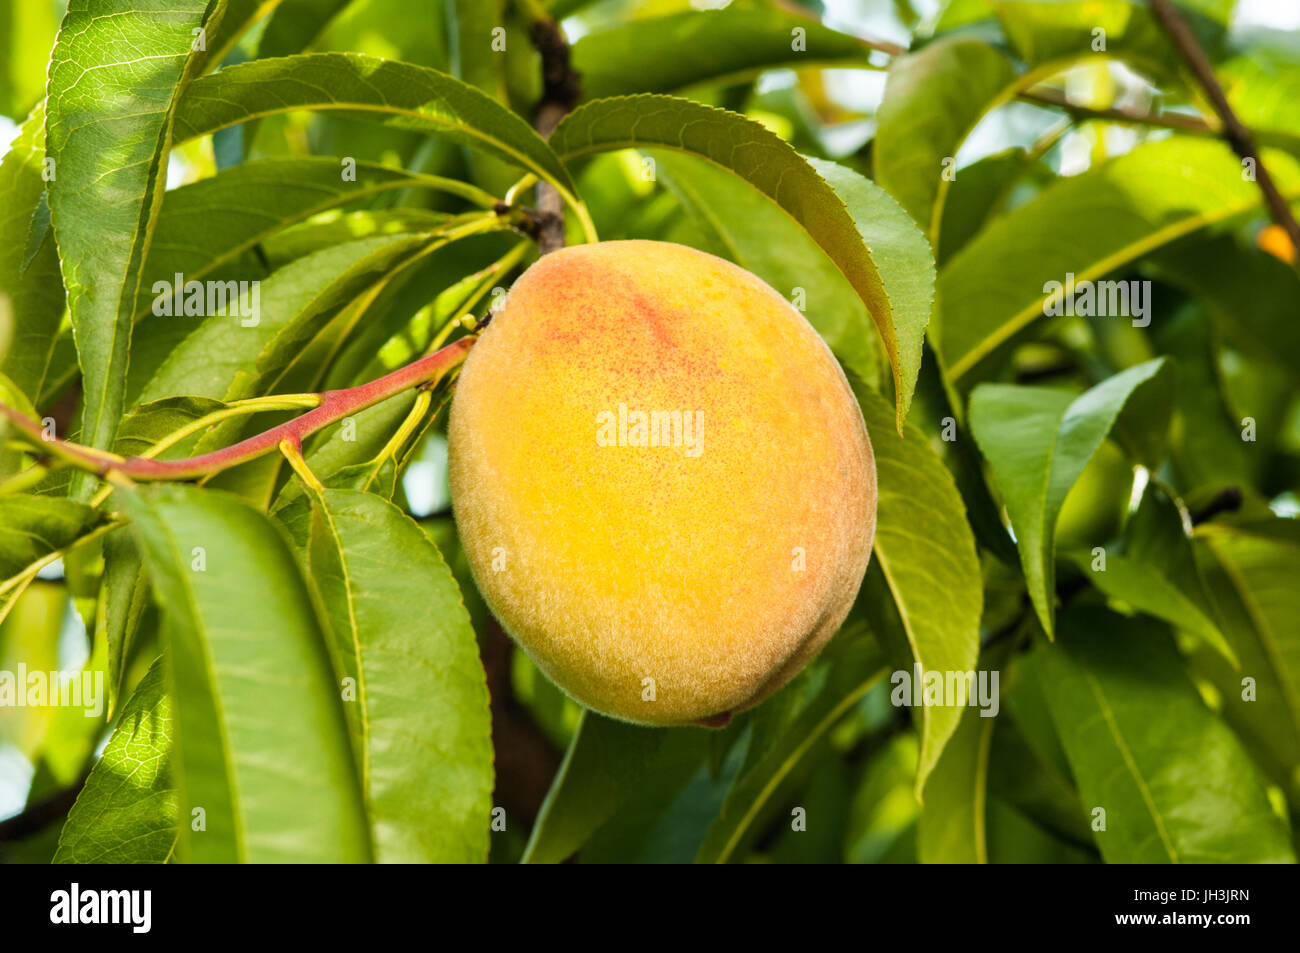 Ripe peach fruits on the tree in garden. Stock Photo